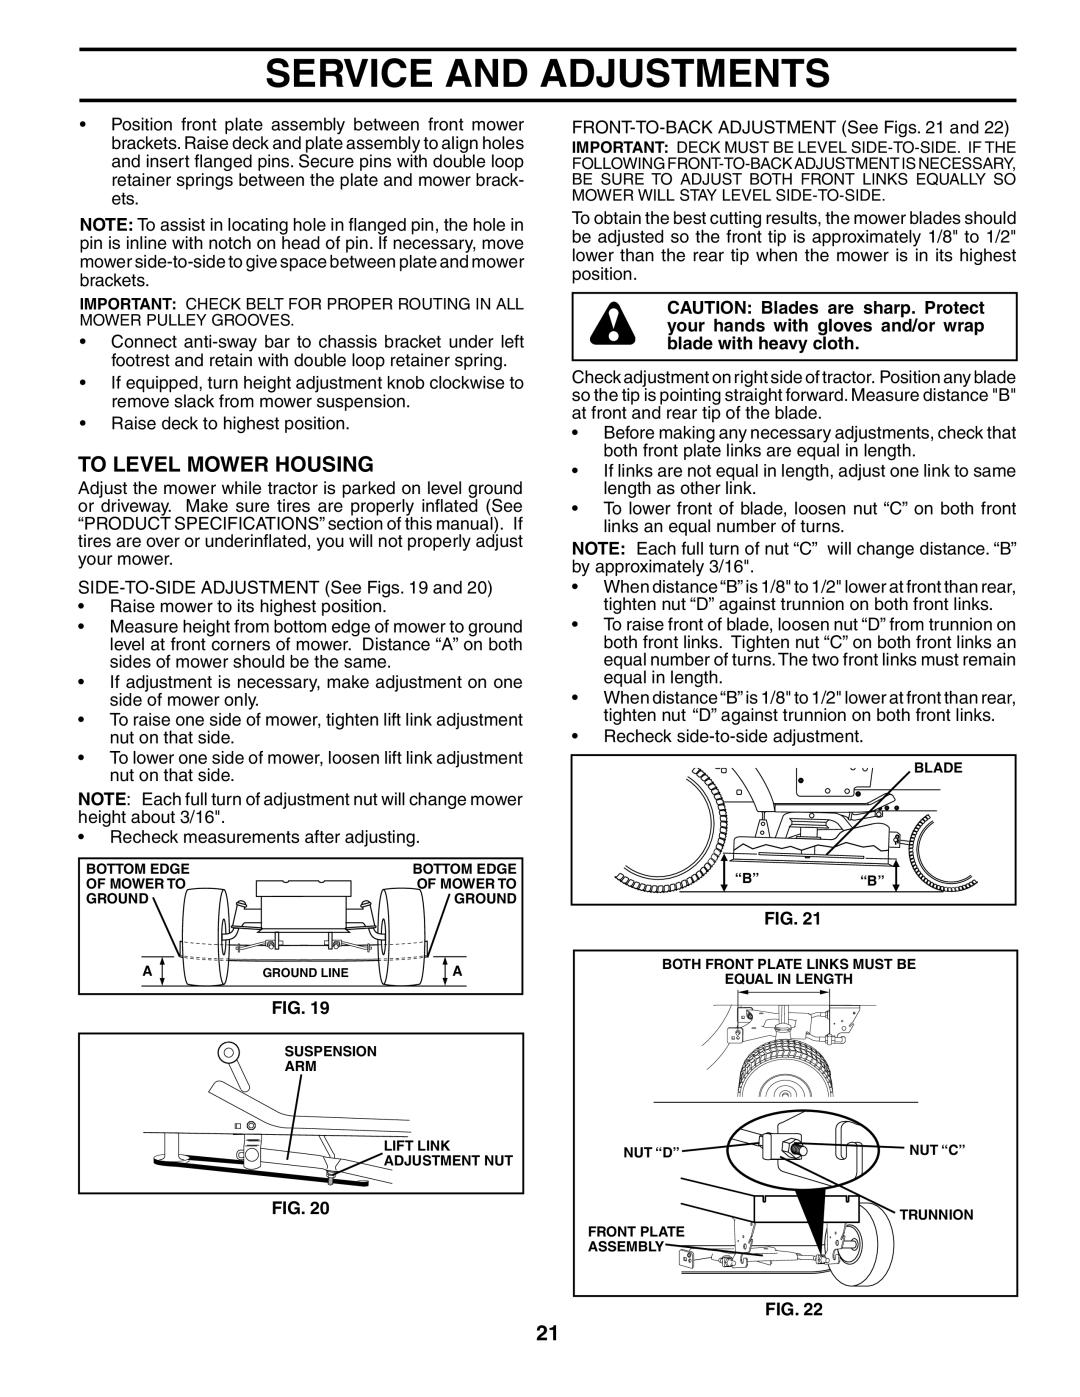 Husqvarna YTH2148 owner manual To Level Mower Housing, Service And Adjustments 